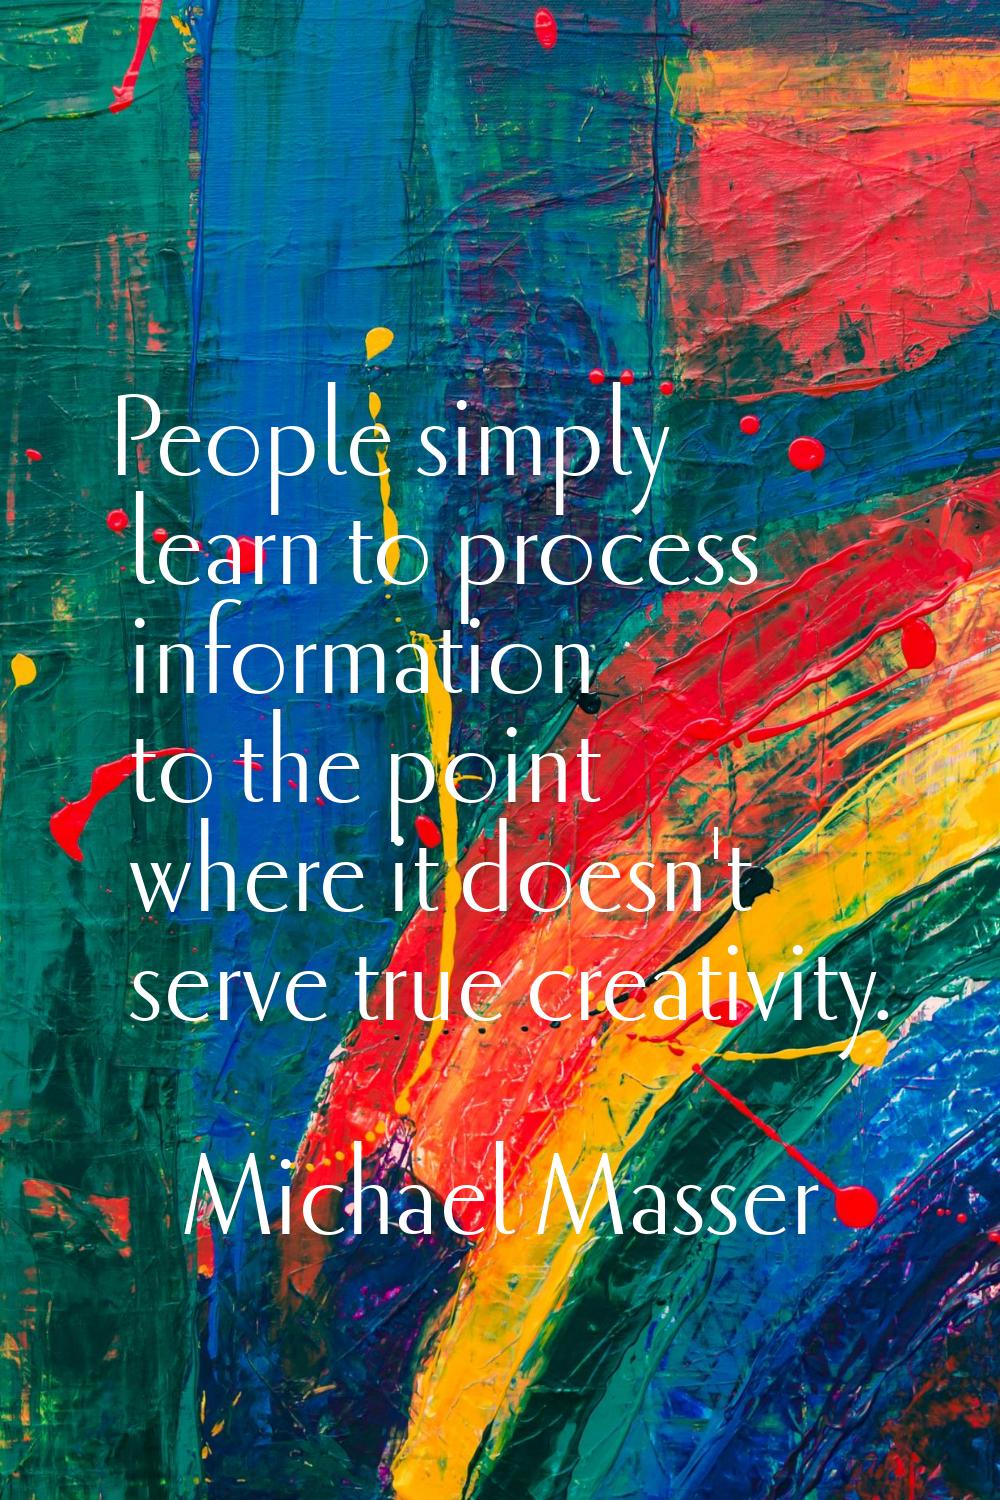 People simply learn to process information to the point where it doesn't serve true creativity.